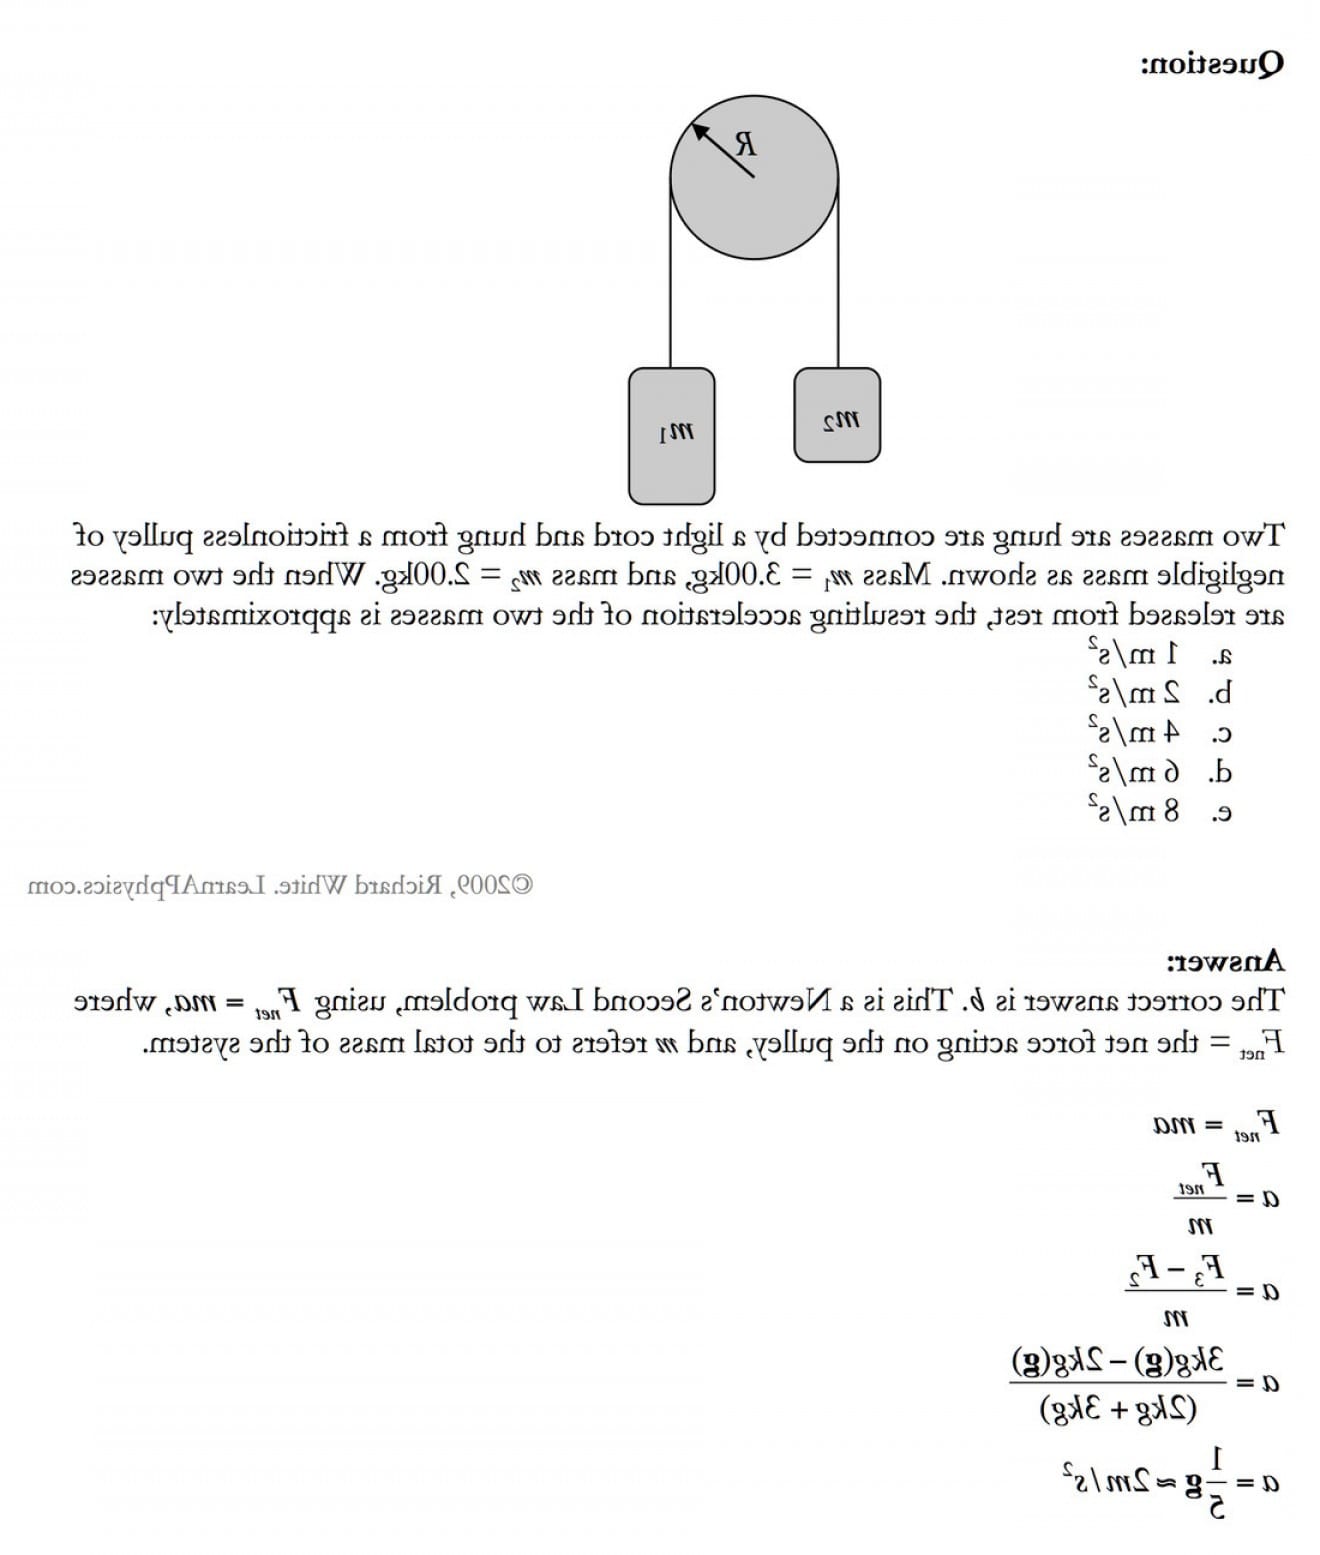 drawing-free-body-diagrams-worksheet-answers-physics-classroom-db-excel